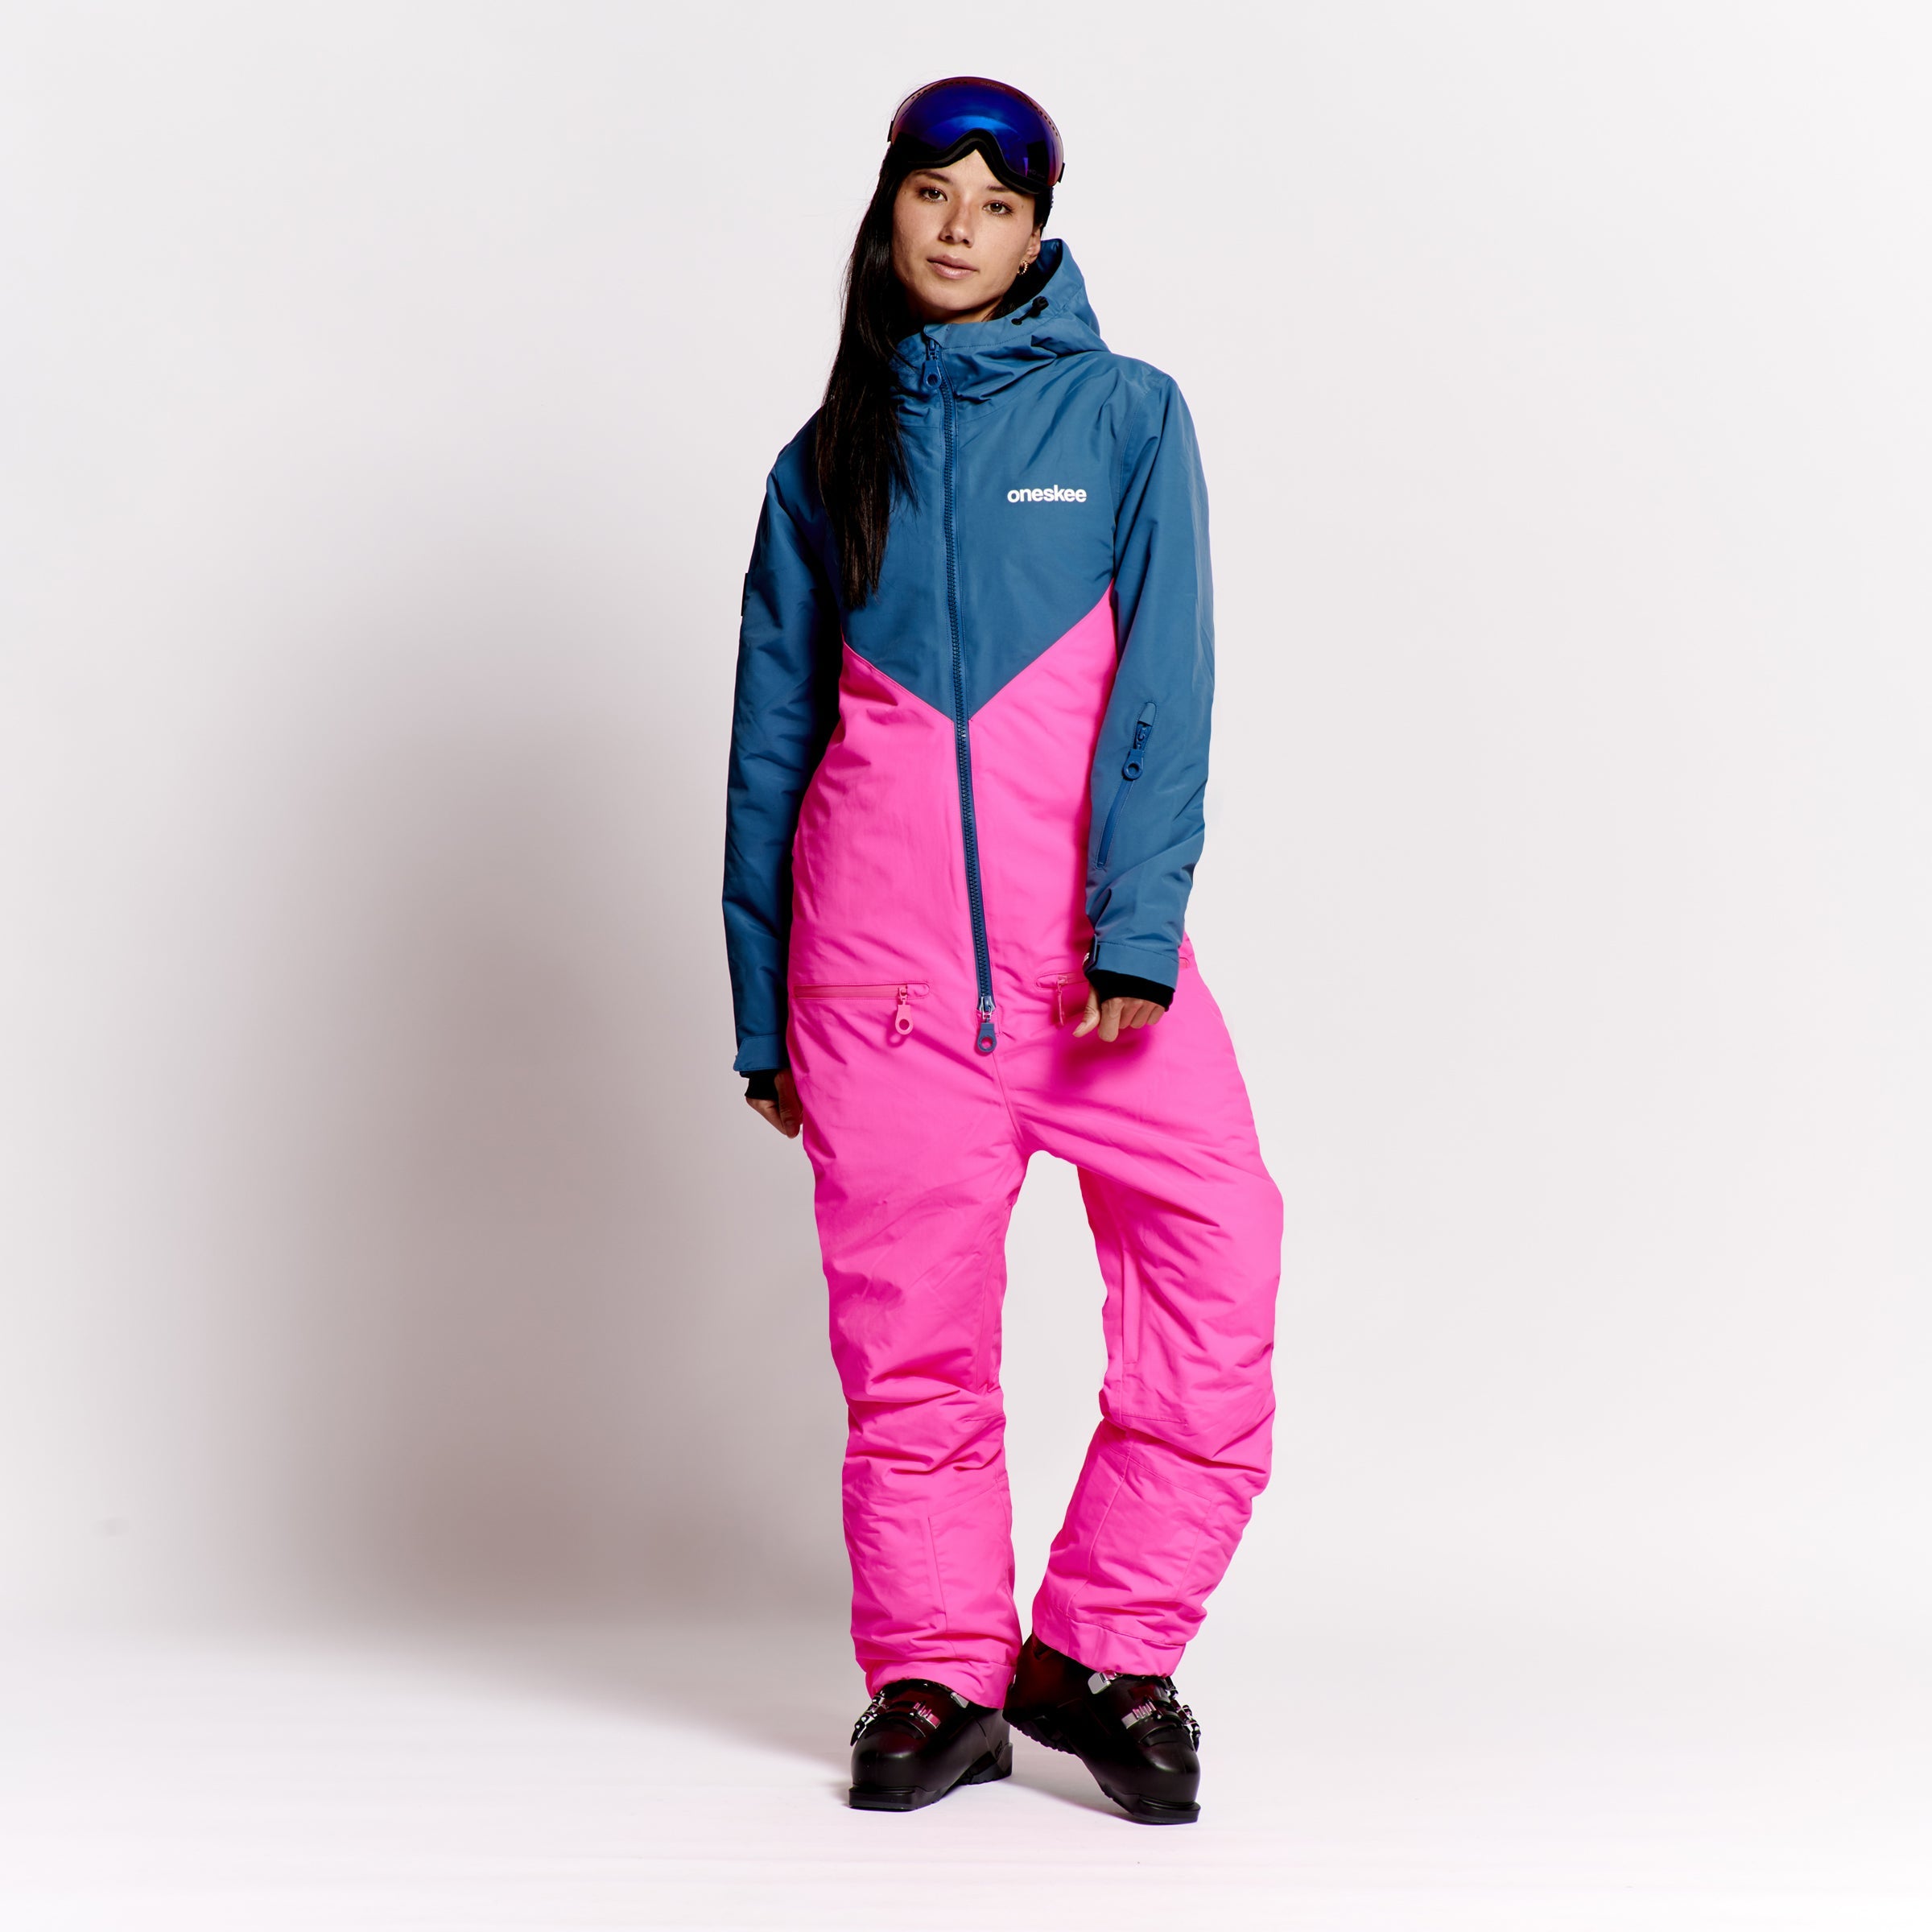 Women's Ski Suits - Dare to be Different - oneskee-ltd-us